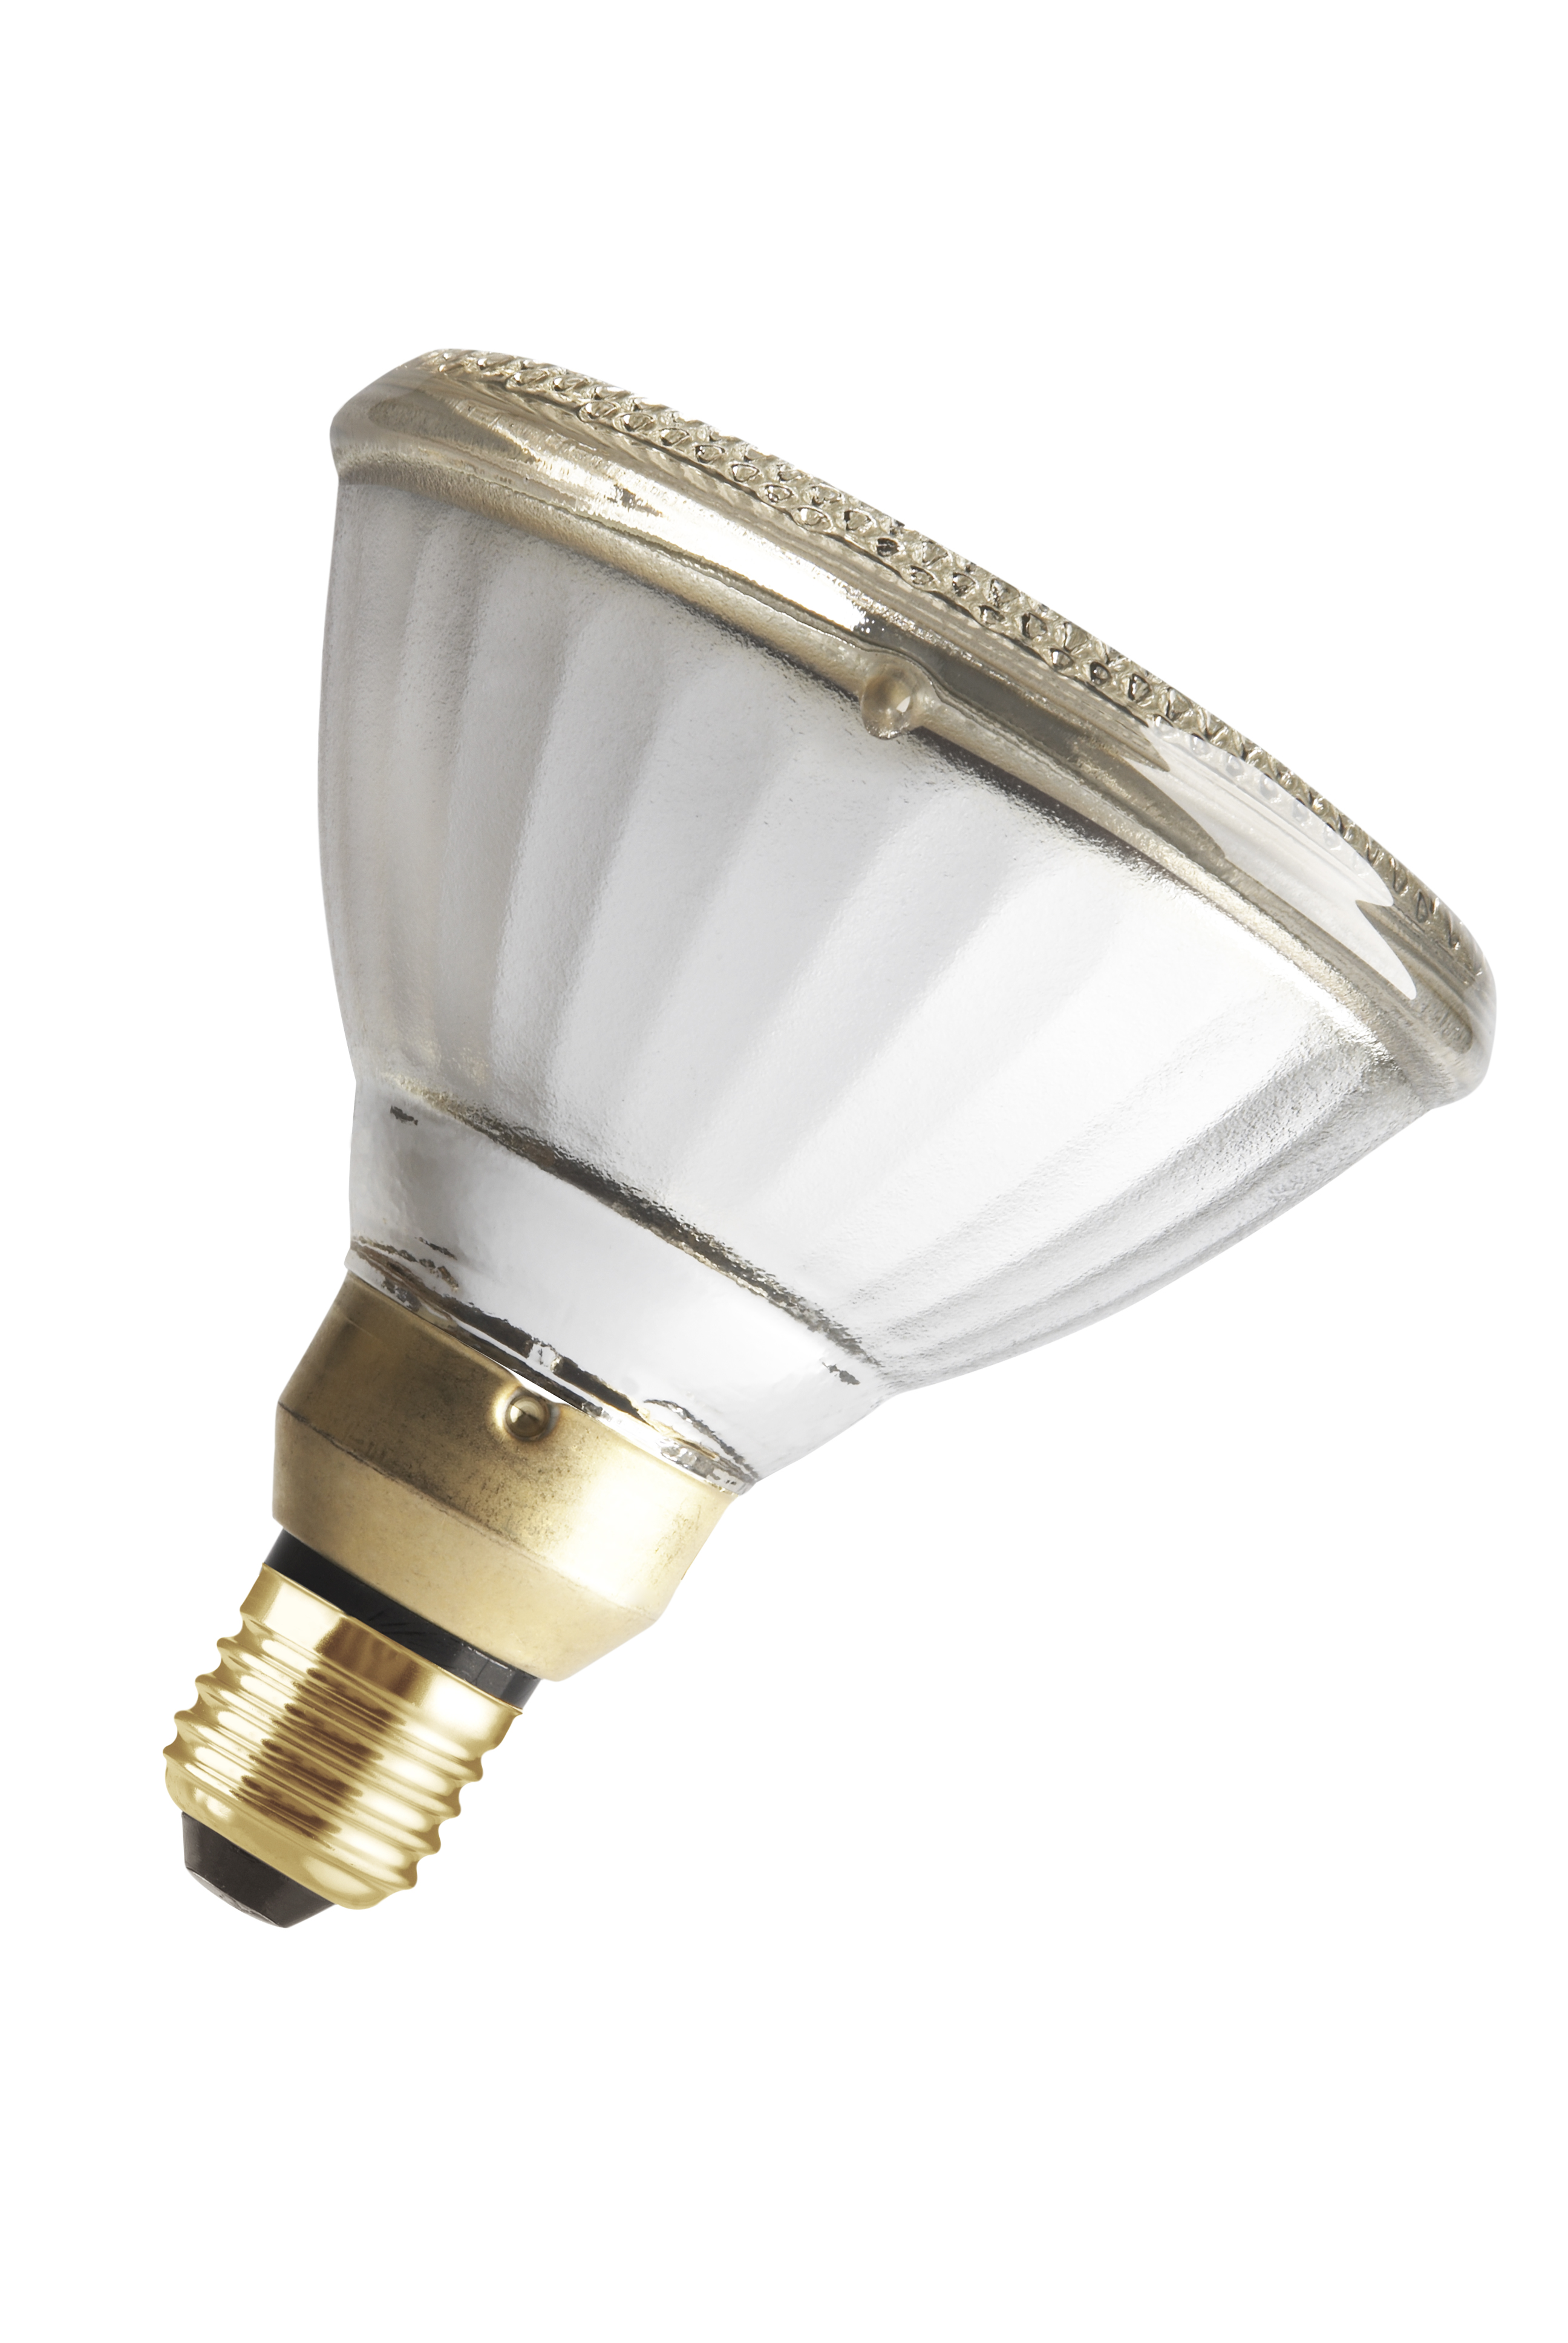 Incandescent lamp with reflector